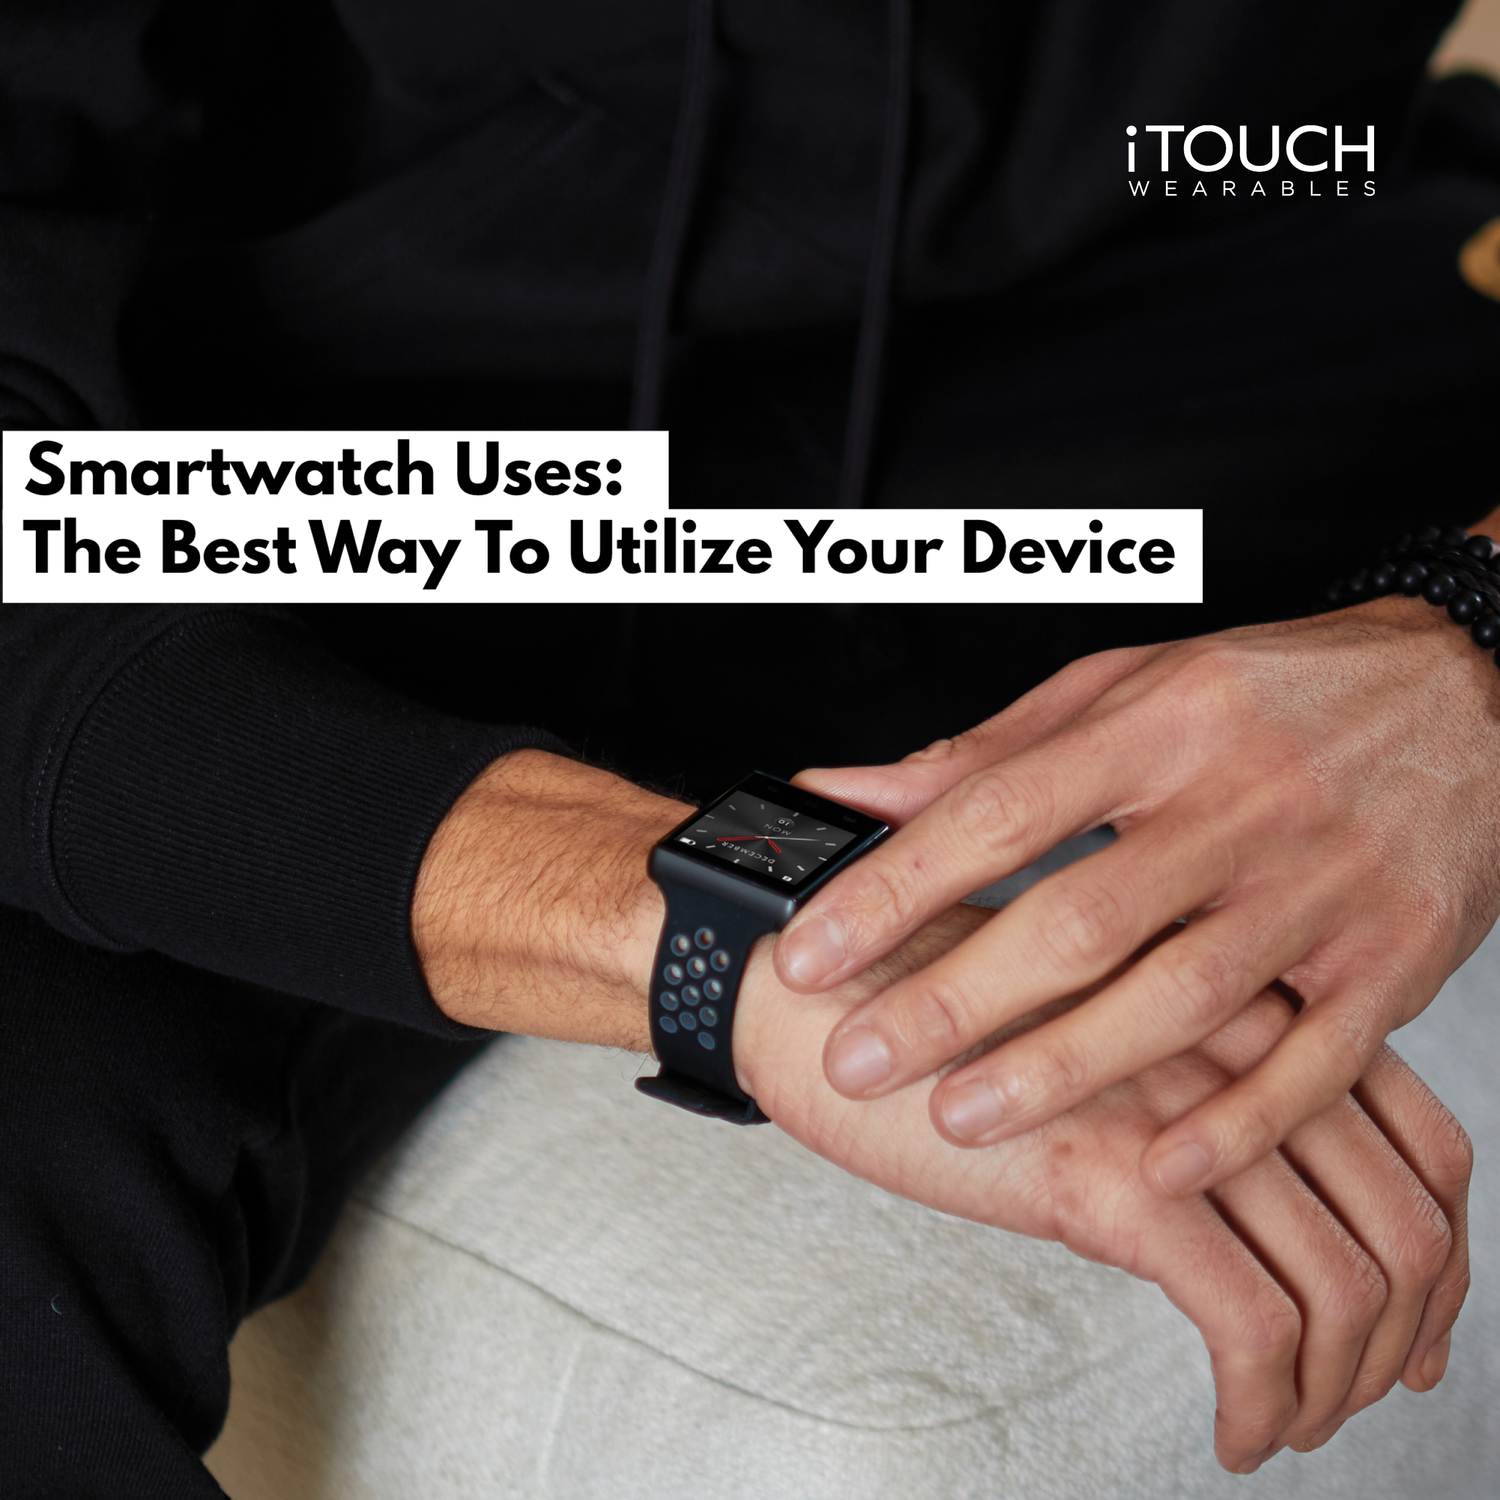 Smartwatch Uses: The Best Way To Utilize Your Device